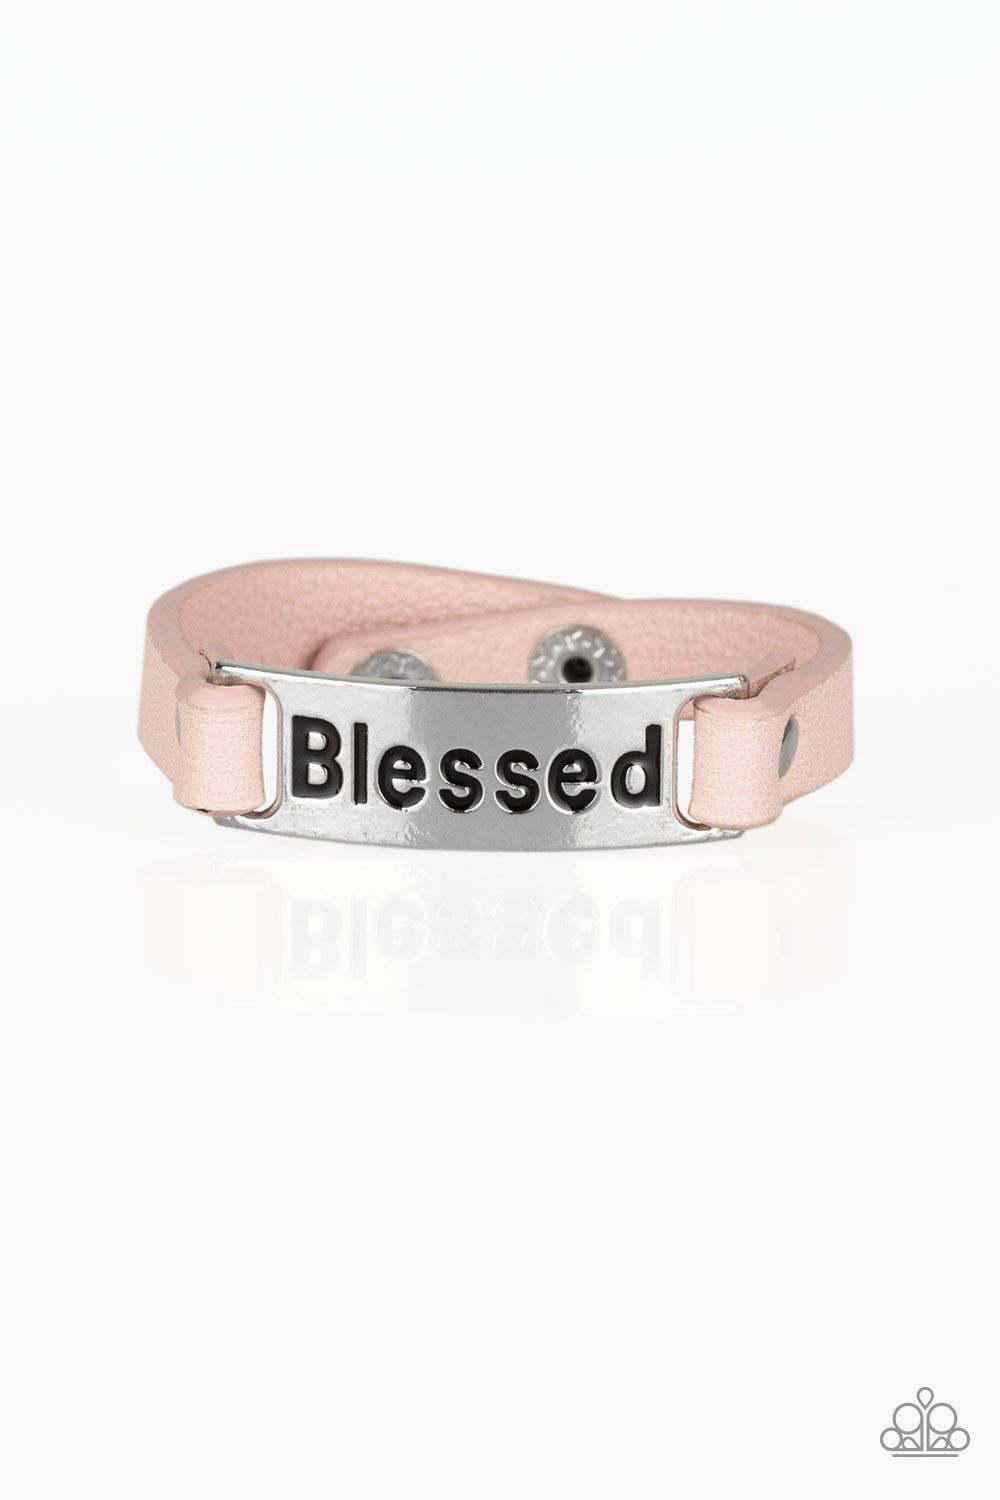 Count Your Blessings - Pink Blessed Bracelet - Paparazzi Accessories - GlaMarous Titi Jewels